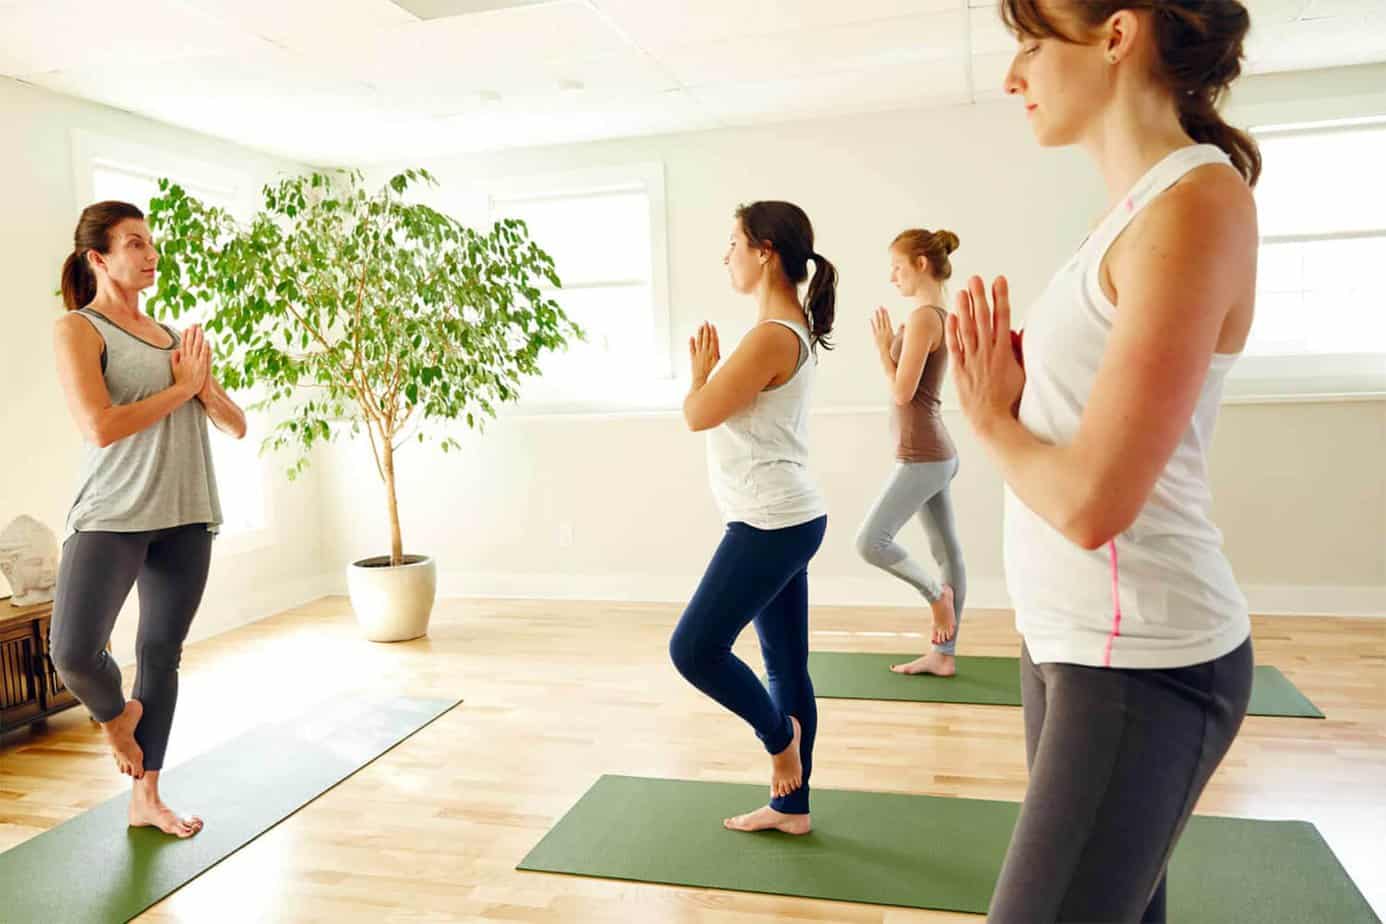 Women recovering from drug and alcohol addiction taking a yoga class at Mountainside rehab center